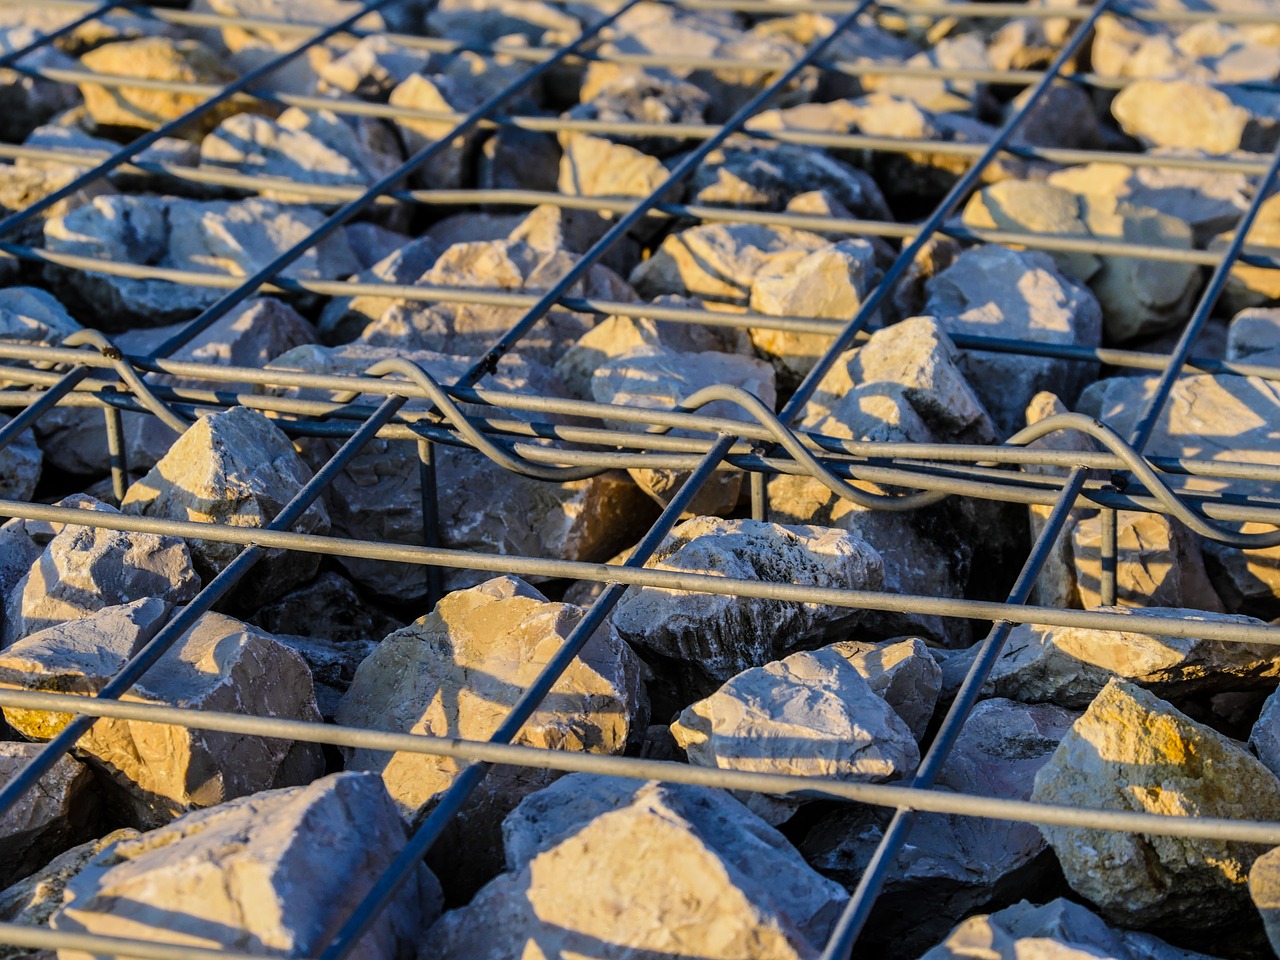 Photograph of a gabion by Monika P from pixabay.